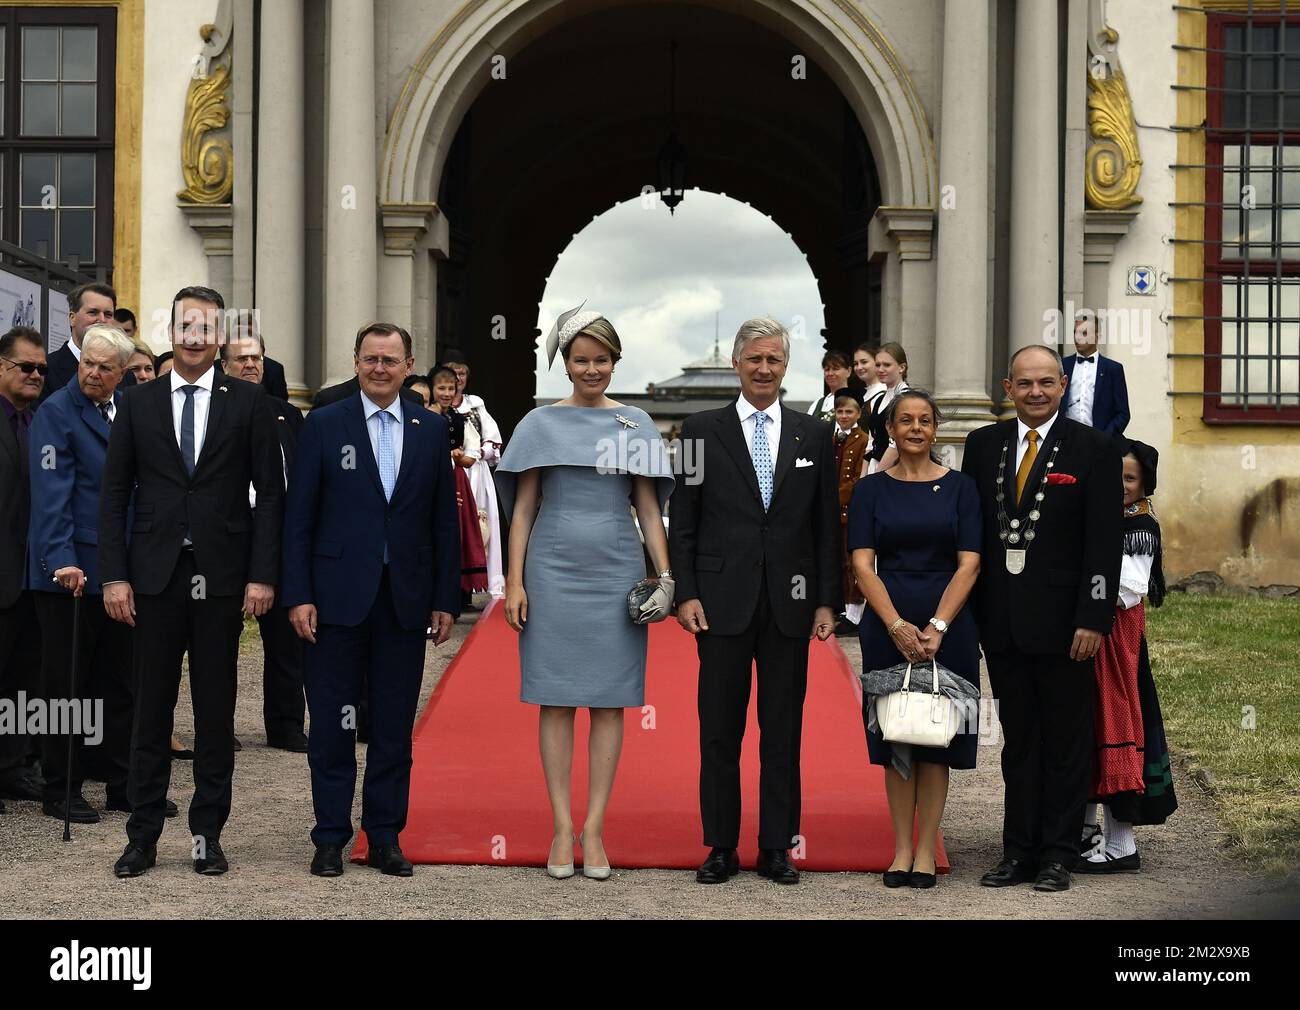 Hereditary Prince Hubertus von Sachsen-Coburg und Gotha, an unidentified man, Queen Mathilde of Belgium, King Philippe - Filip of Belgium and Gotha mayor Knut Kreuch and his wife pose for a group picture during a visit to the Schloss Friedenstein in Gotha, Tuesday 09 July 2019. The king and queen are on a two-day visit to Germany and the states Thuringia (Thuringen - Thuringe) and Saxony-Anhalt (Sachsen-Anhalt - Saksen-Anhalt - Saxe-Anhalt). BELGA PHOTO ERIC LALMAND  Stock Photo